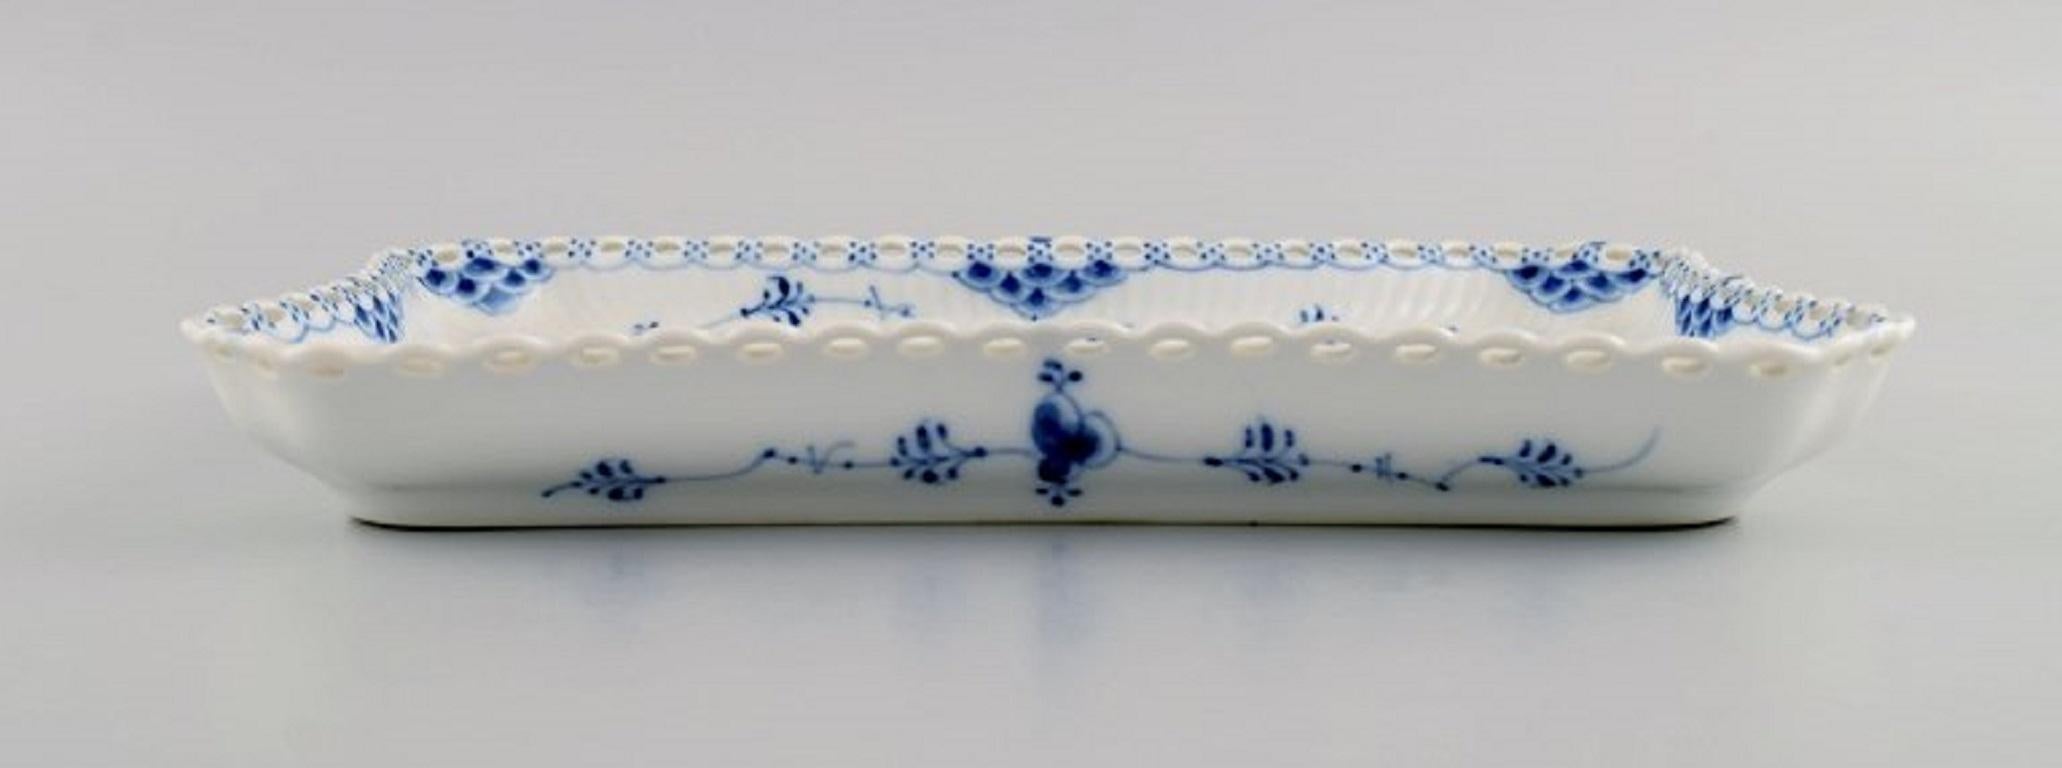 Hand-Painted Royal Copenhagen Blue Fluted Full Lace Tray in Porcelain, Model Number 1/1195